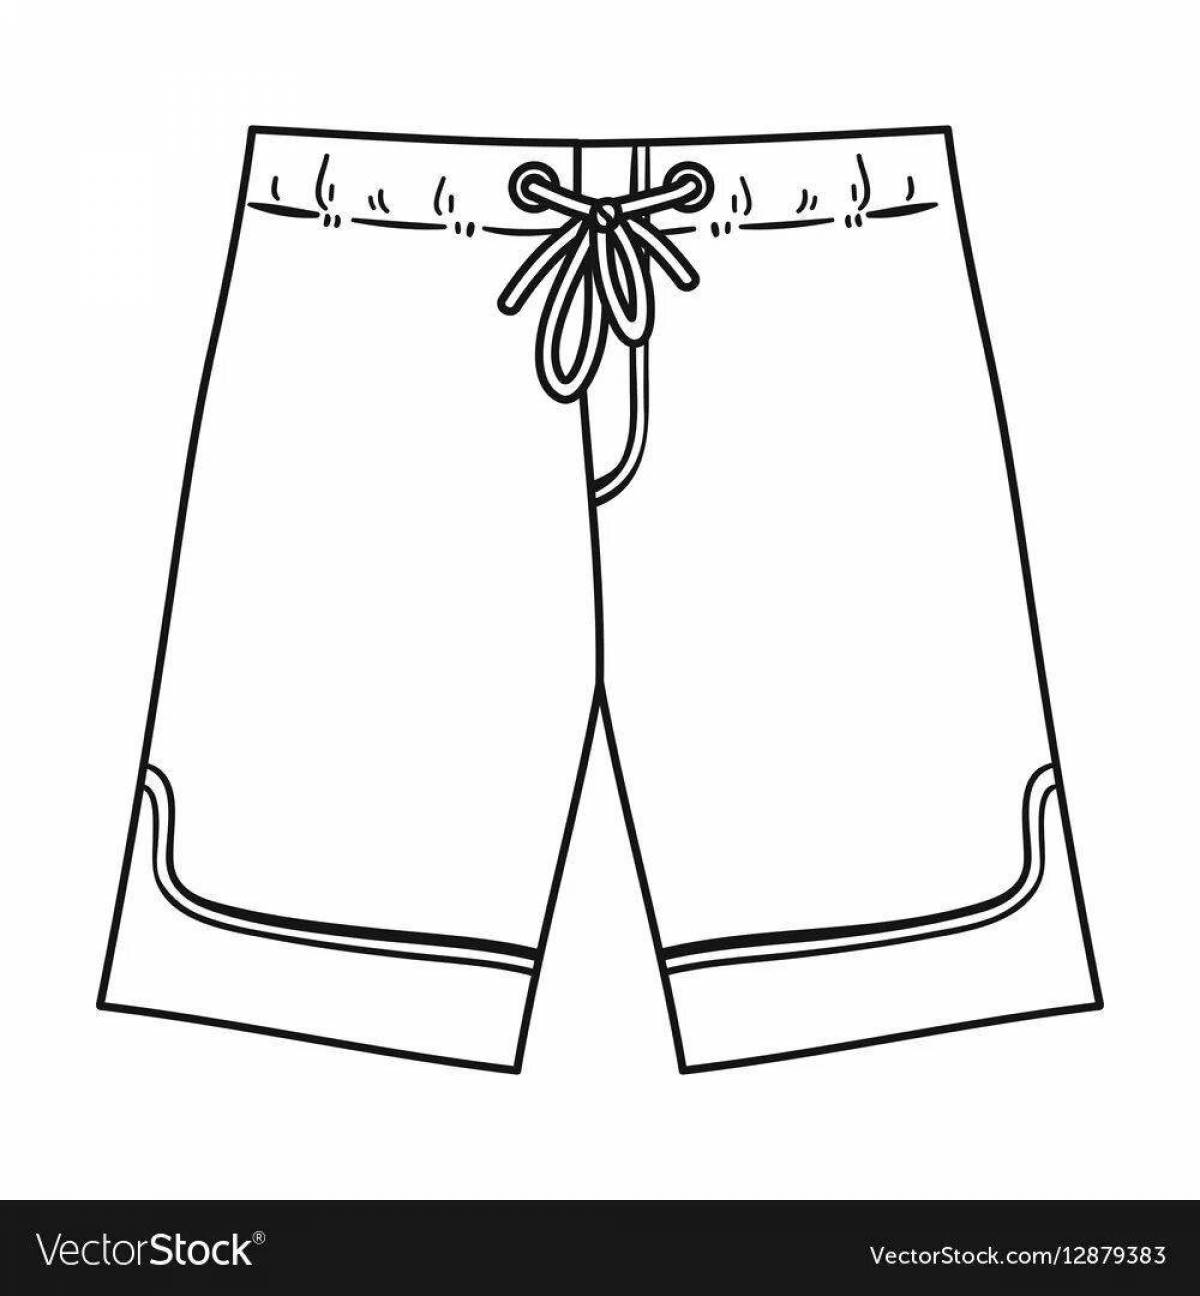 Coloring page for shorts for kids